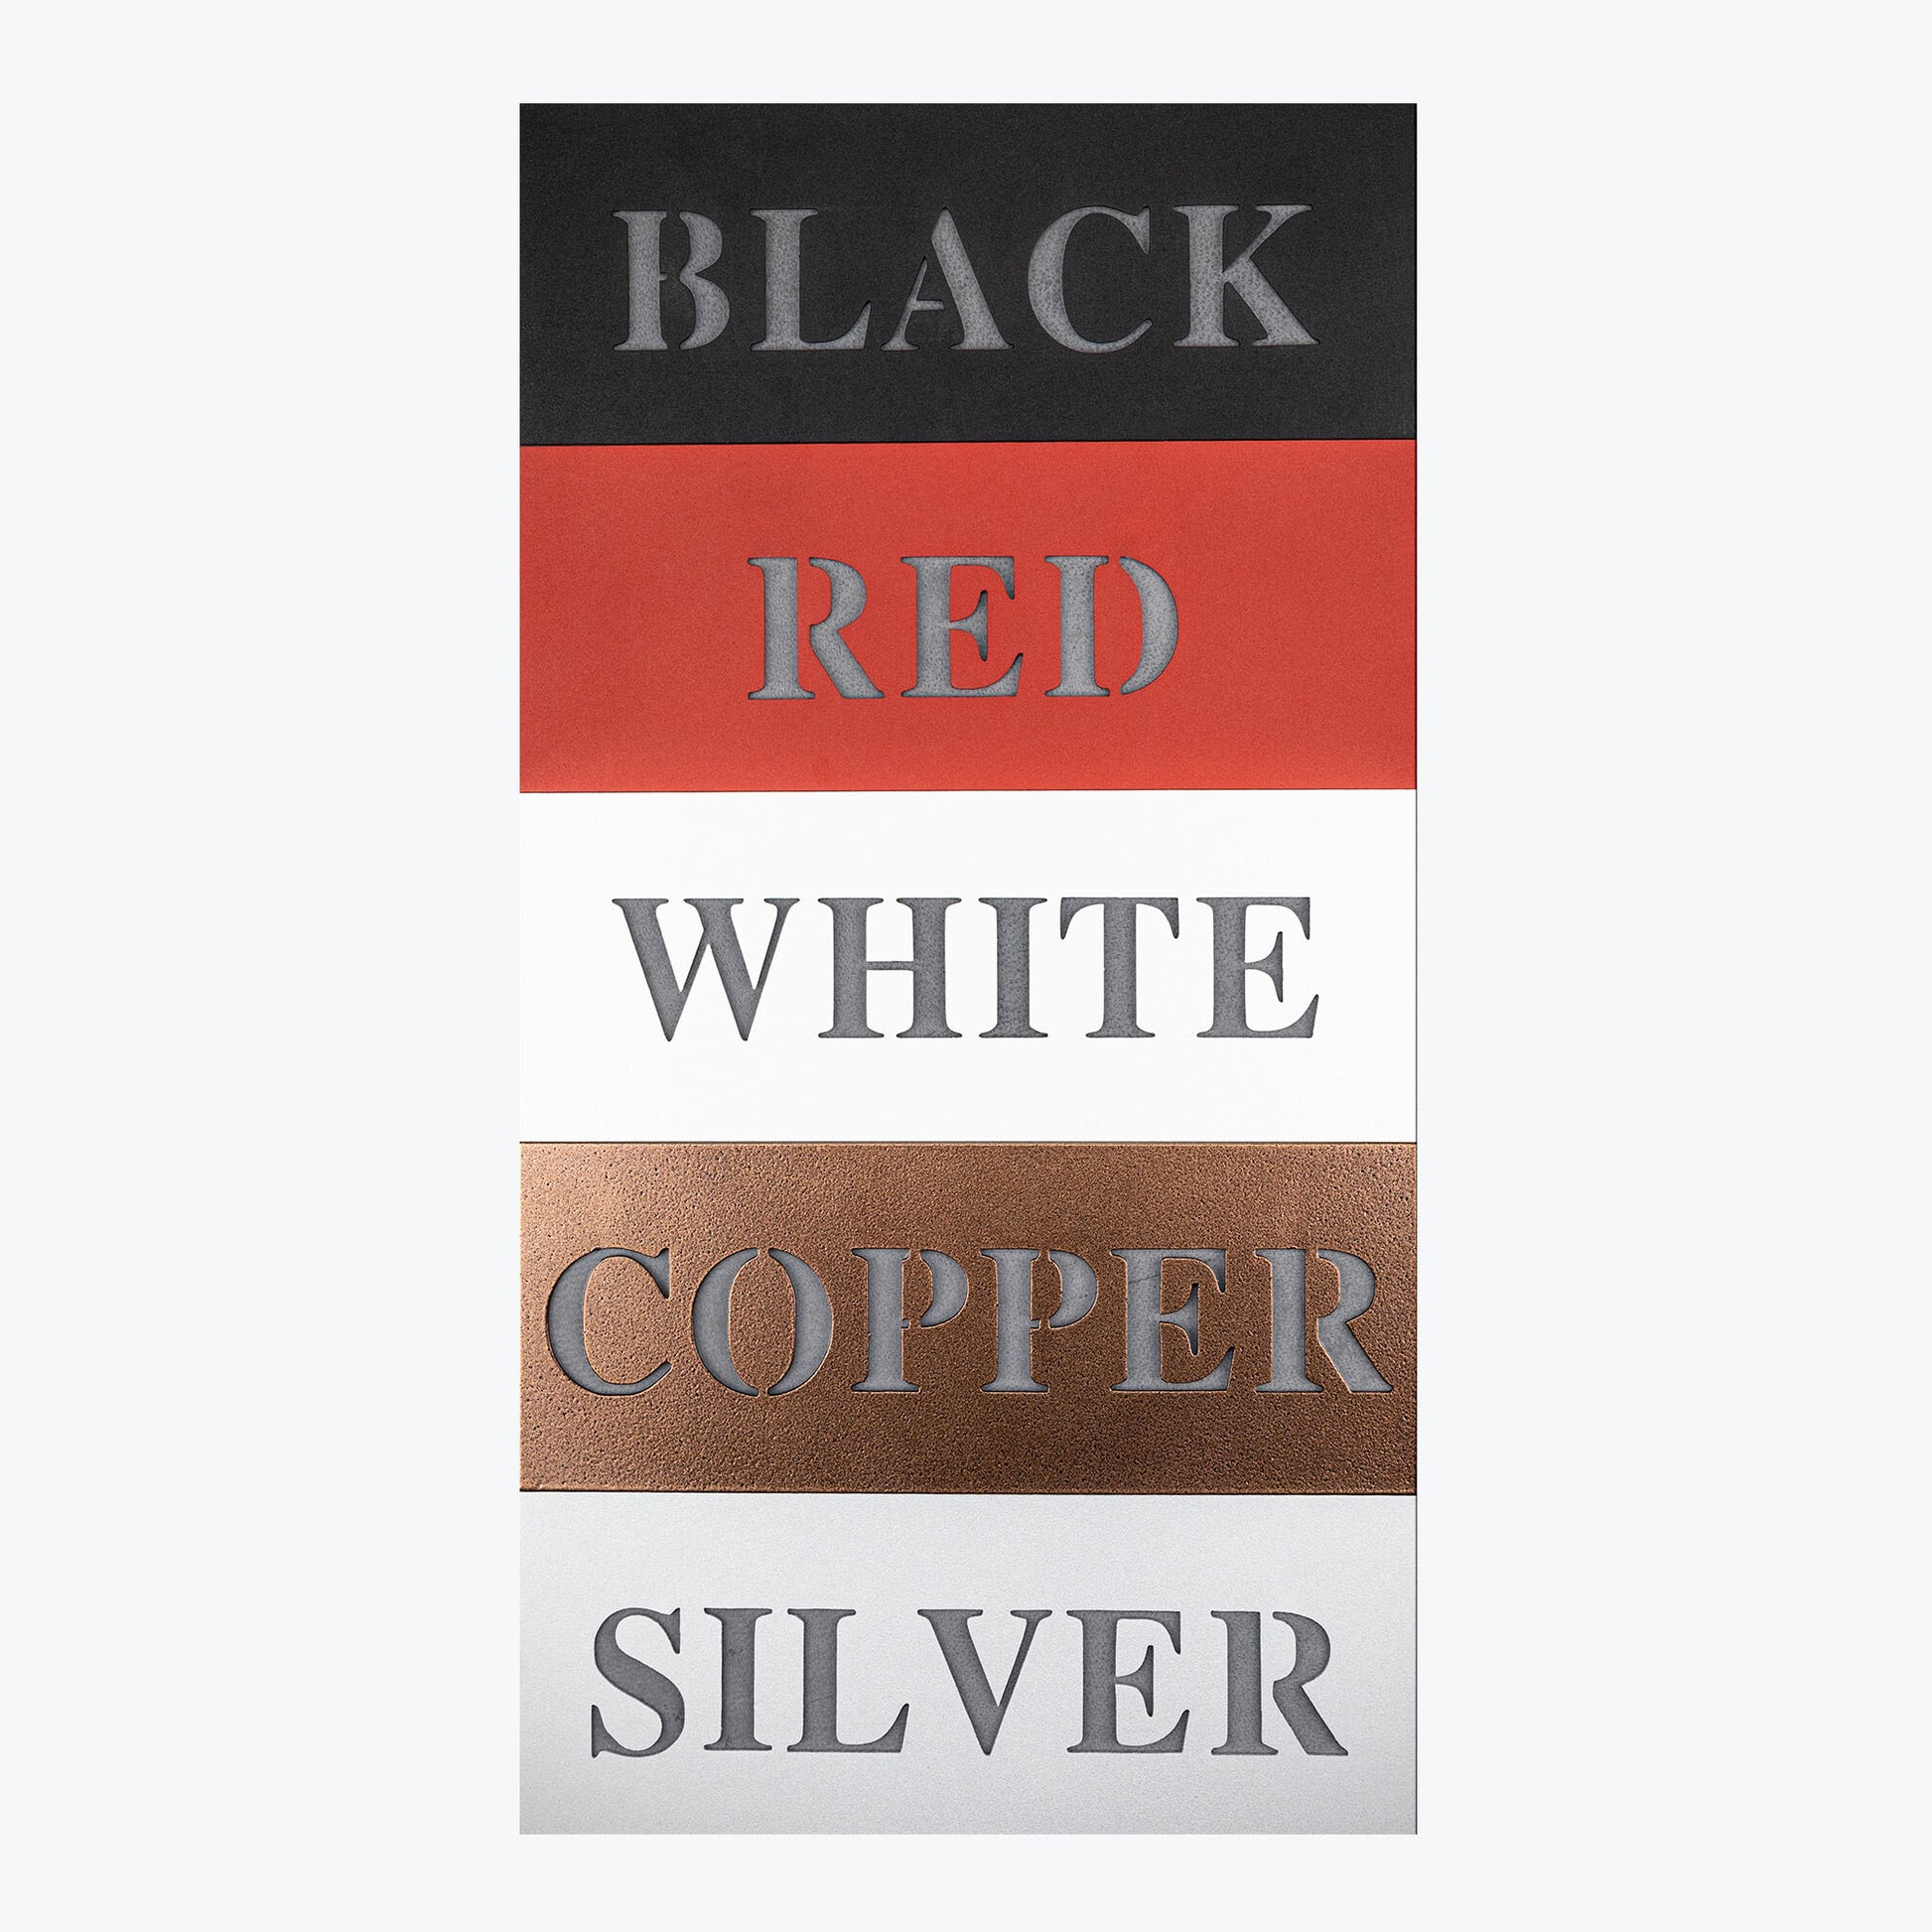 Knitting Studio Metal Wall Art Personalized Color Options Black Red White Copper Silver